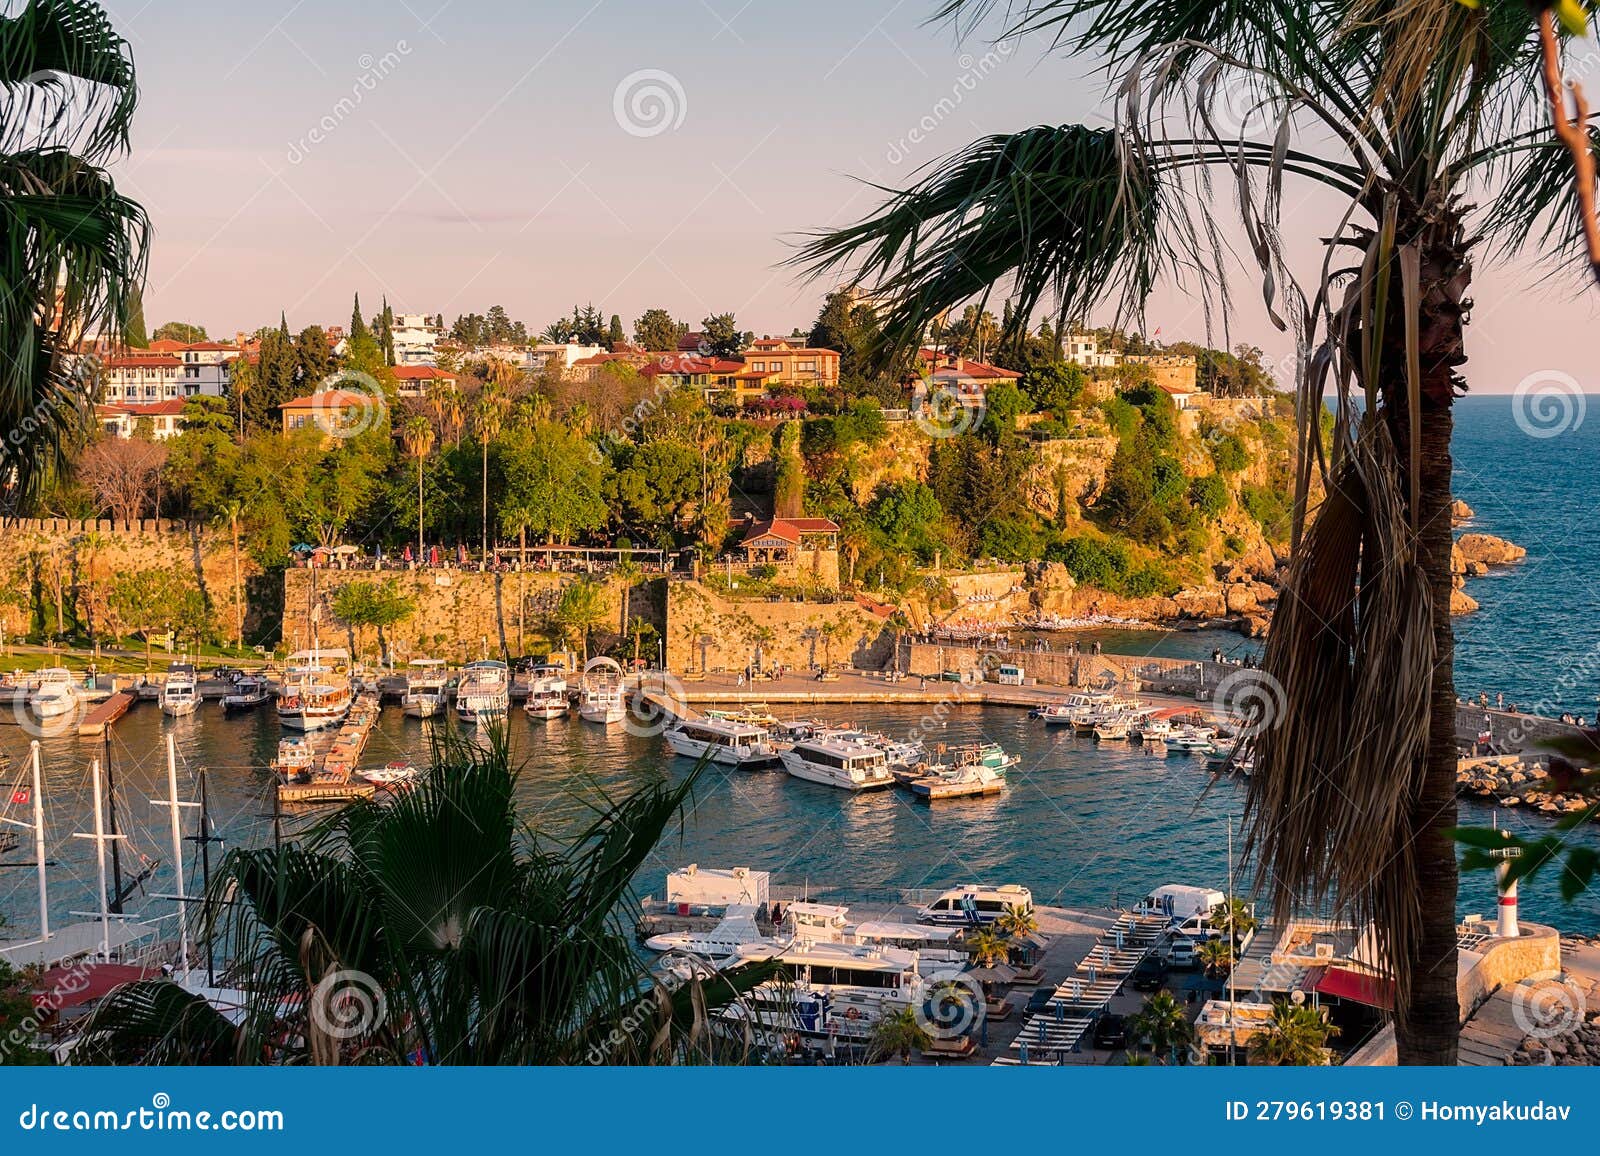 view from a height of the harbor near the old town of kaleichi in the turkish city of antalya.